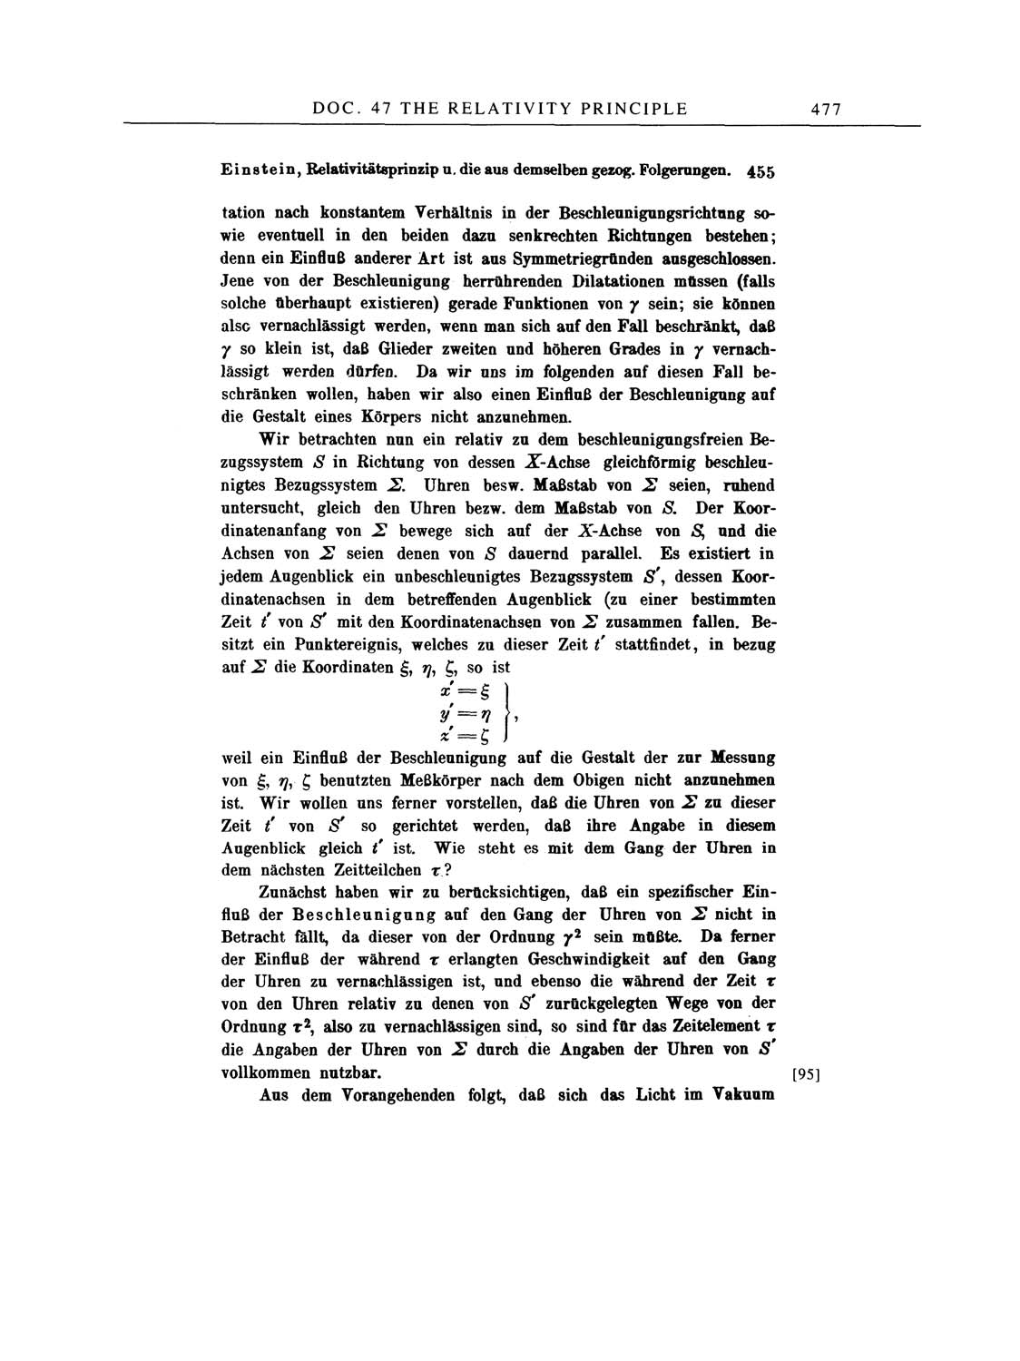 Volume 2: The Swiss Years: Writings, 1900-1909 page 477